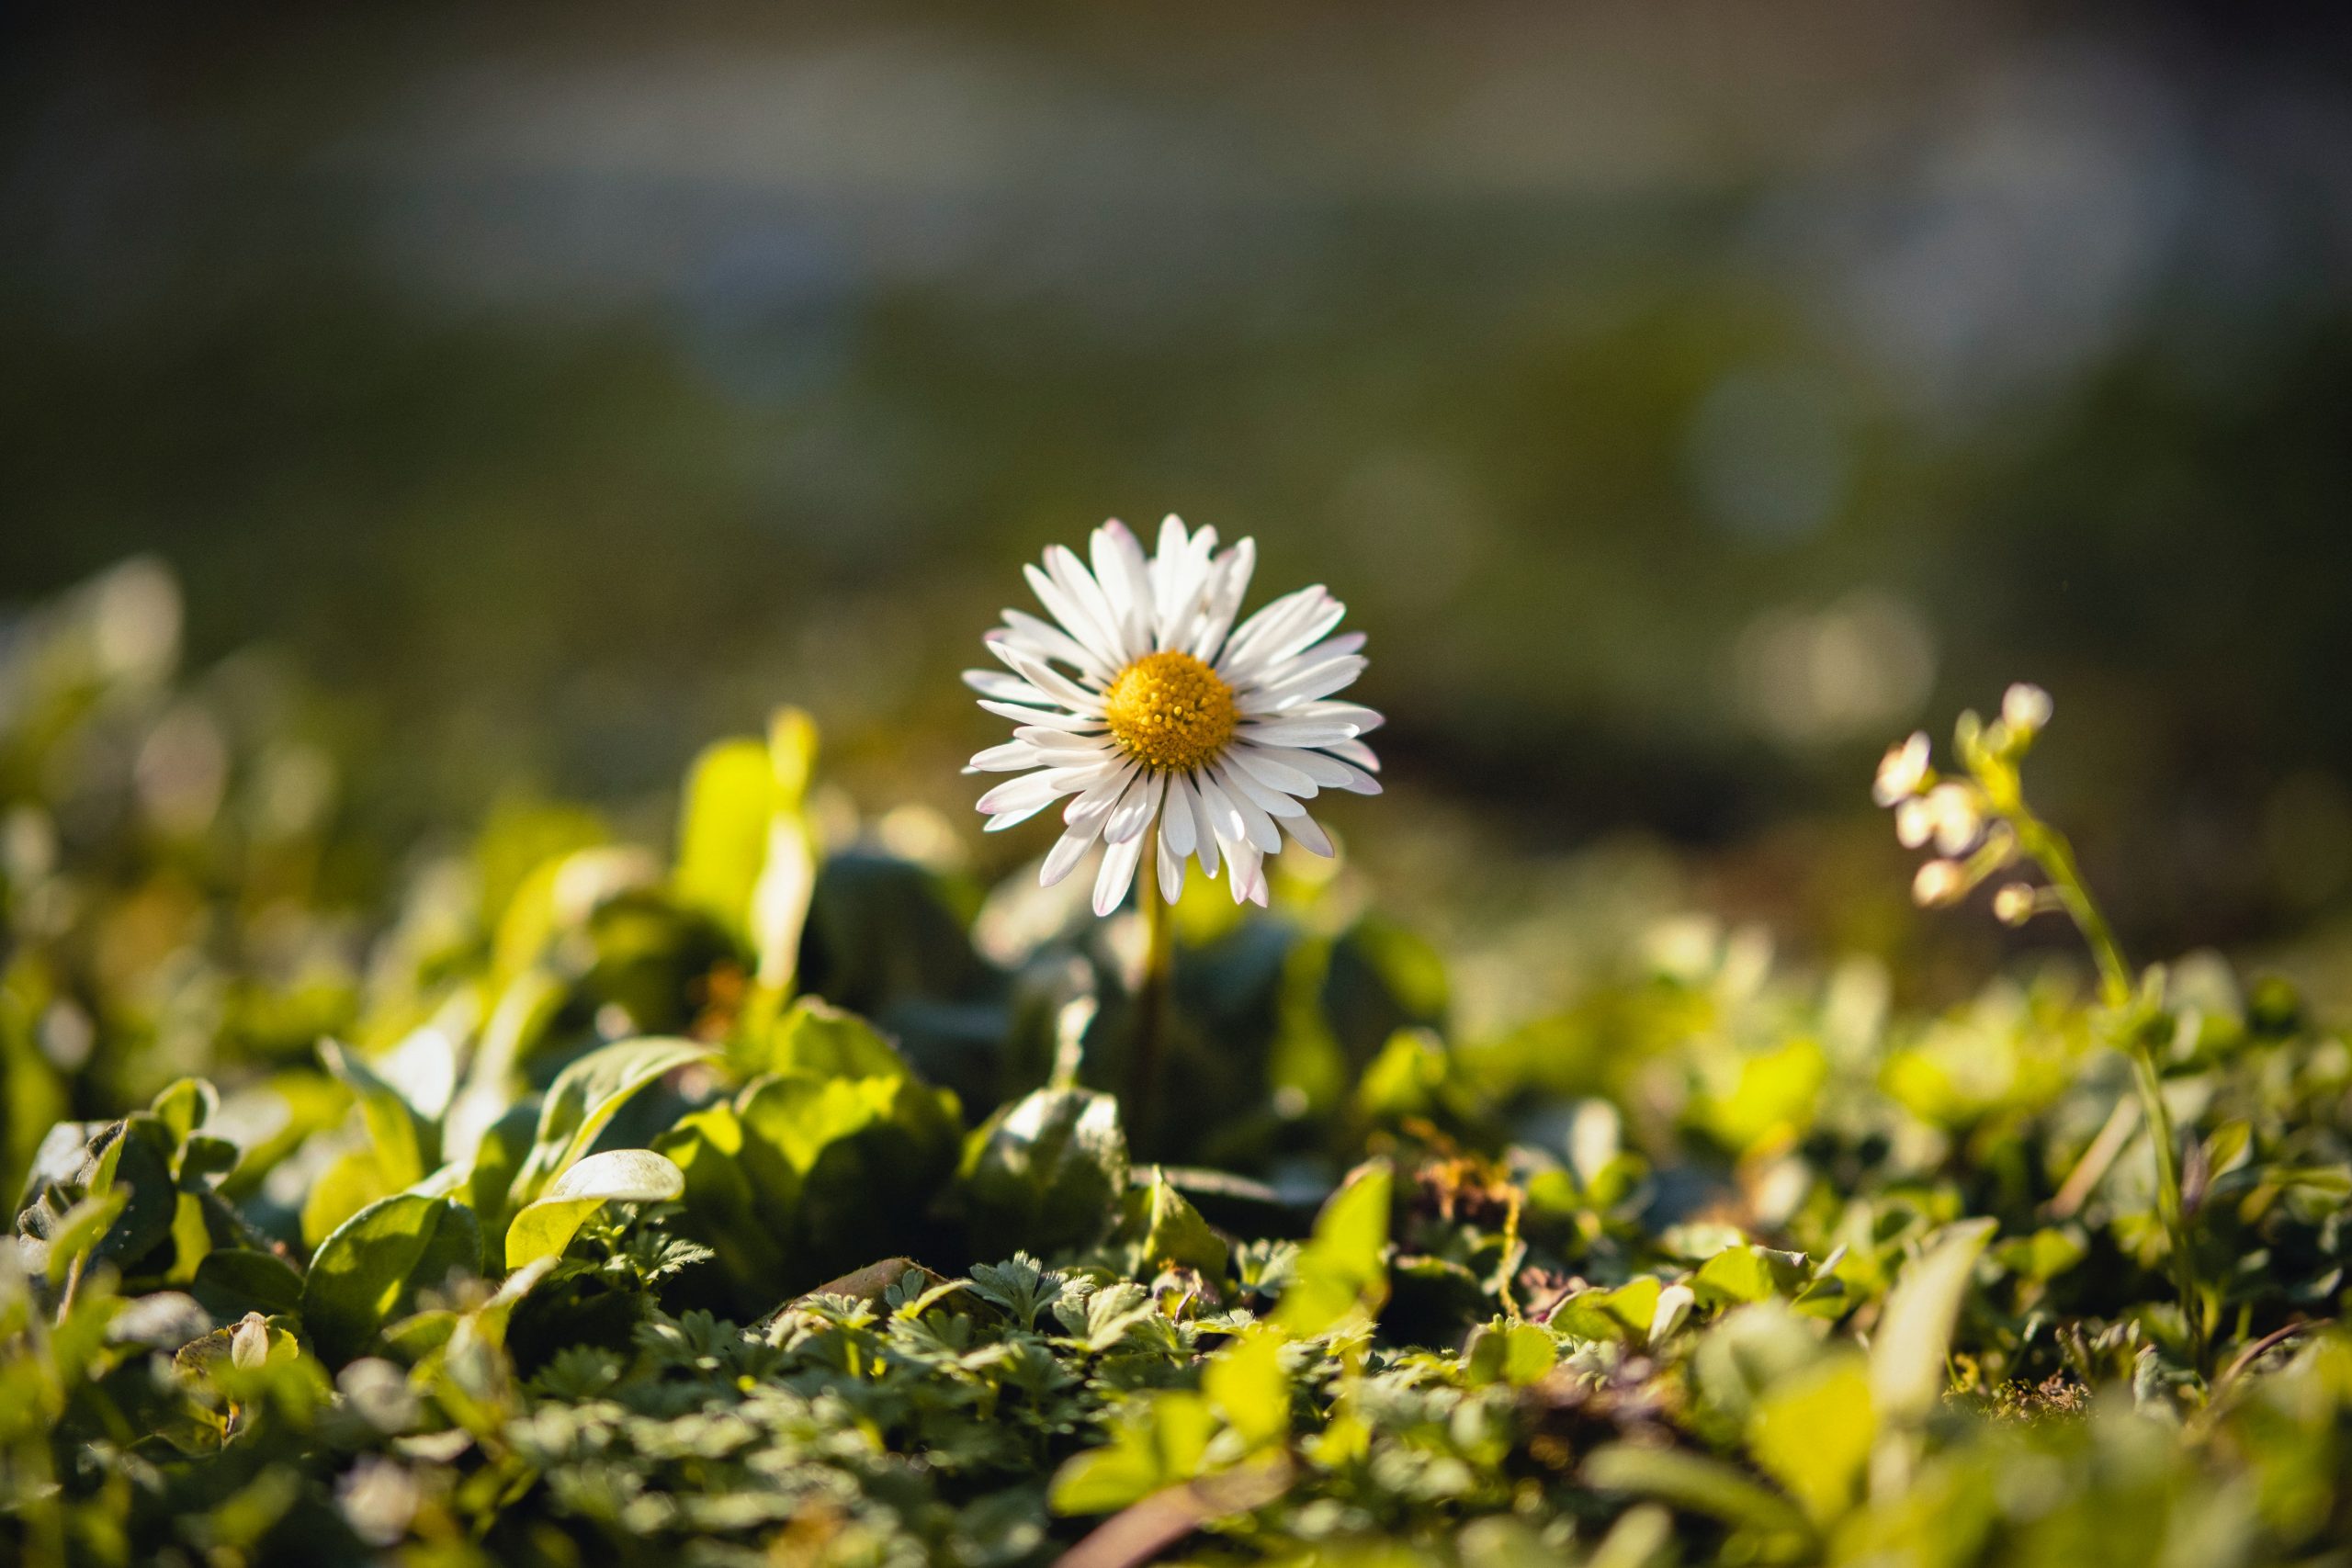 A close-up photograph of a single daisy flower with white petals and a golden centre. The daisy is surrounded by small green plants and is bathed in happy sunshine.